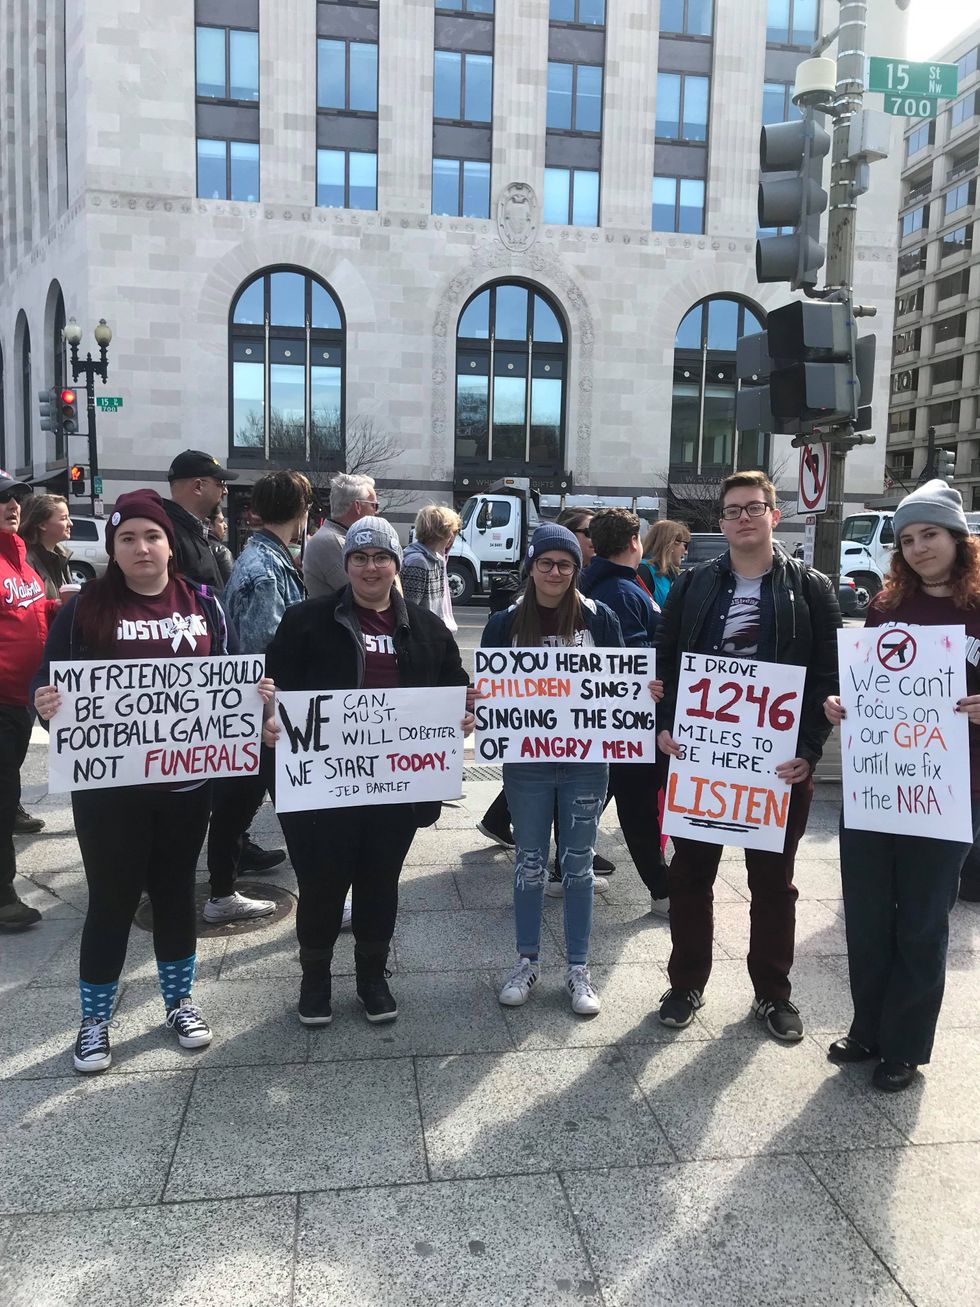 My Experience At March For Our Lives D.C.